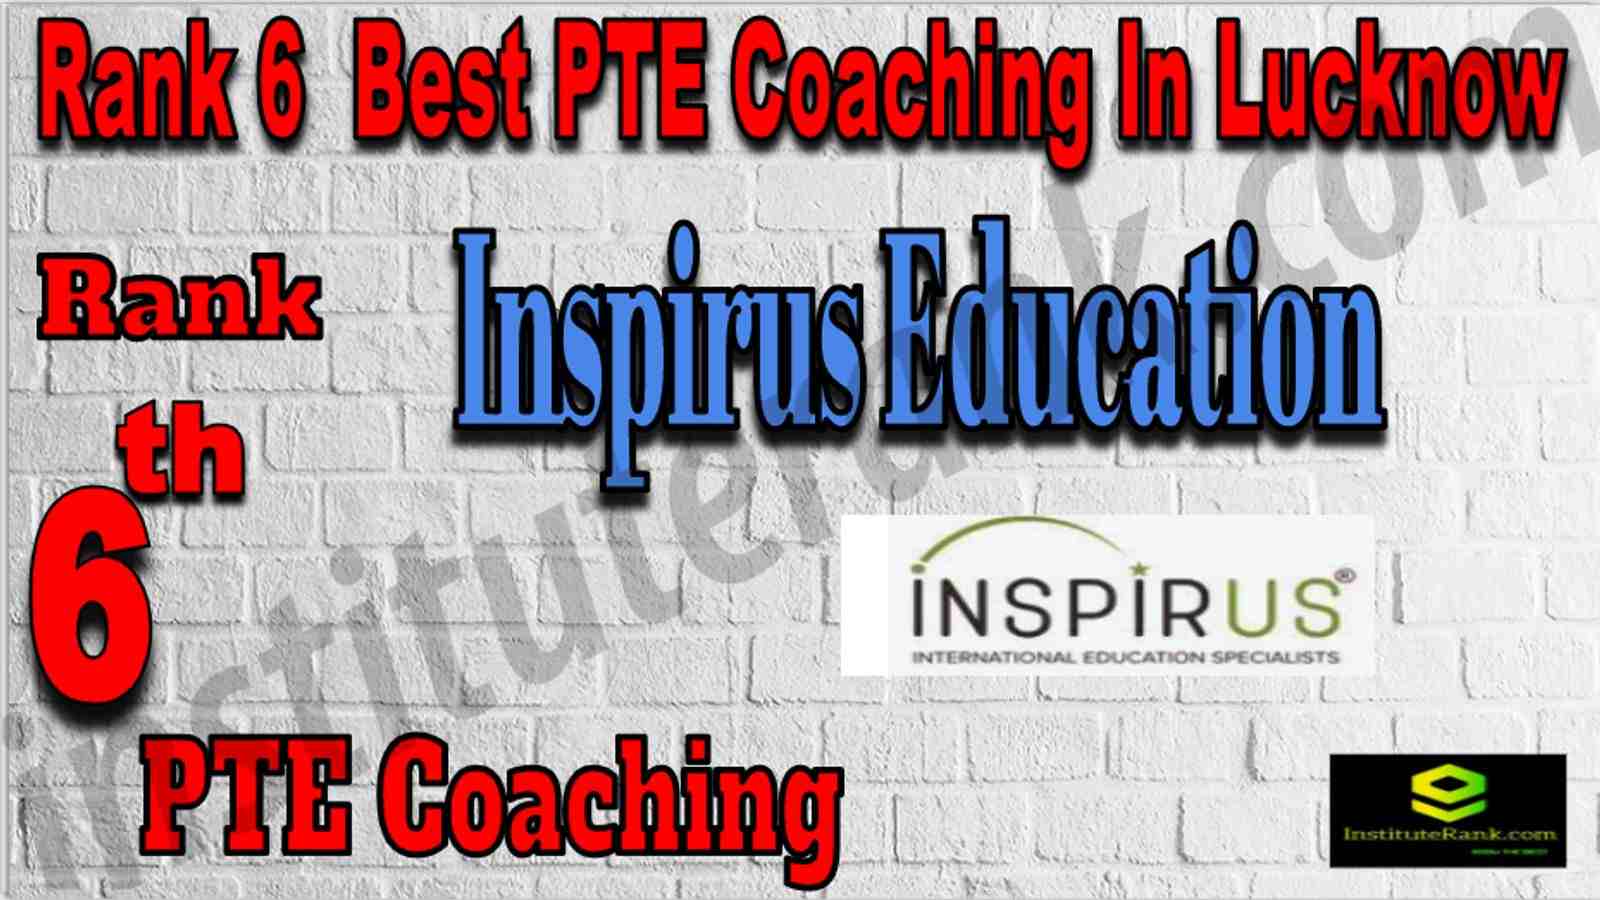 Rank 6 Best PTE Coaching In Lucknow